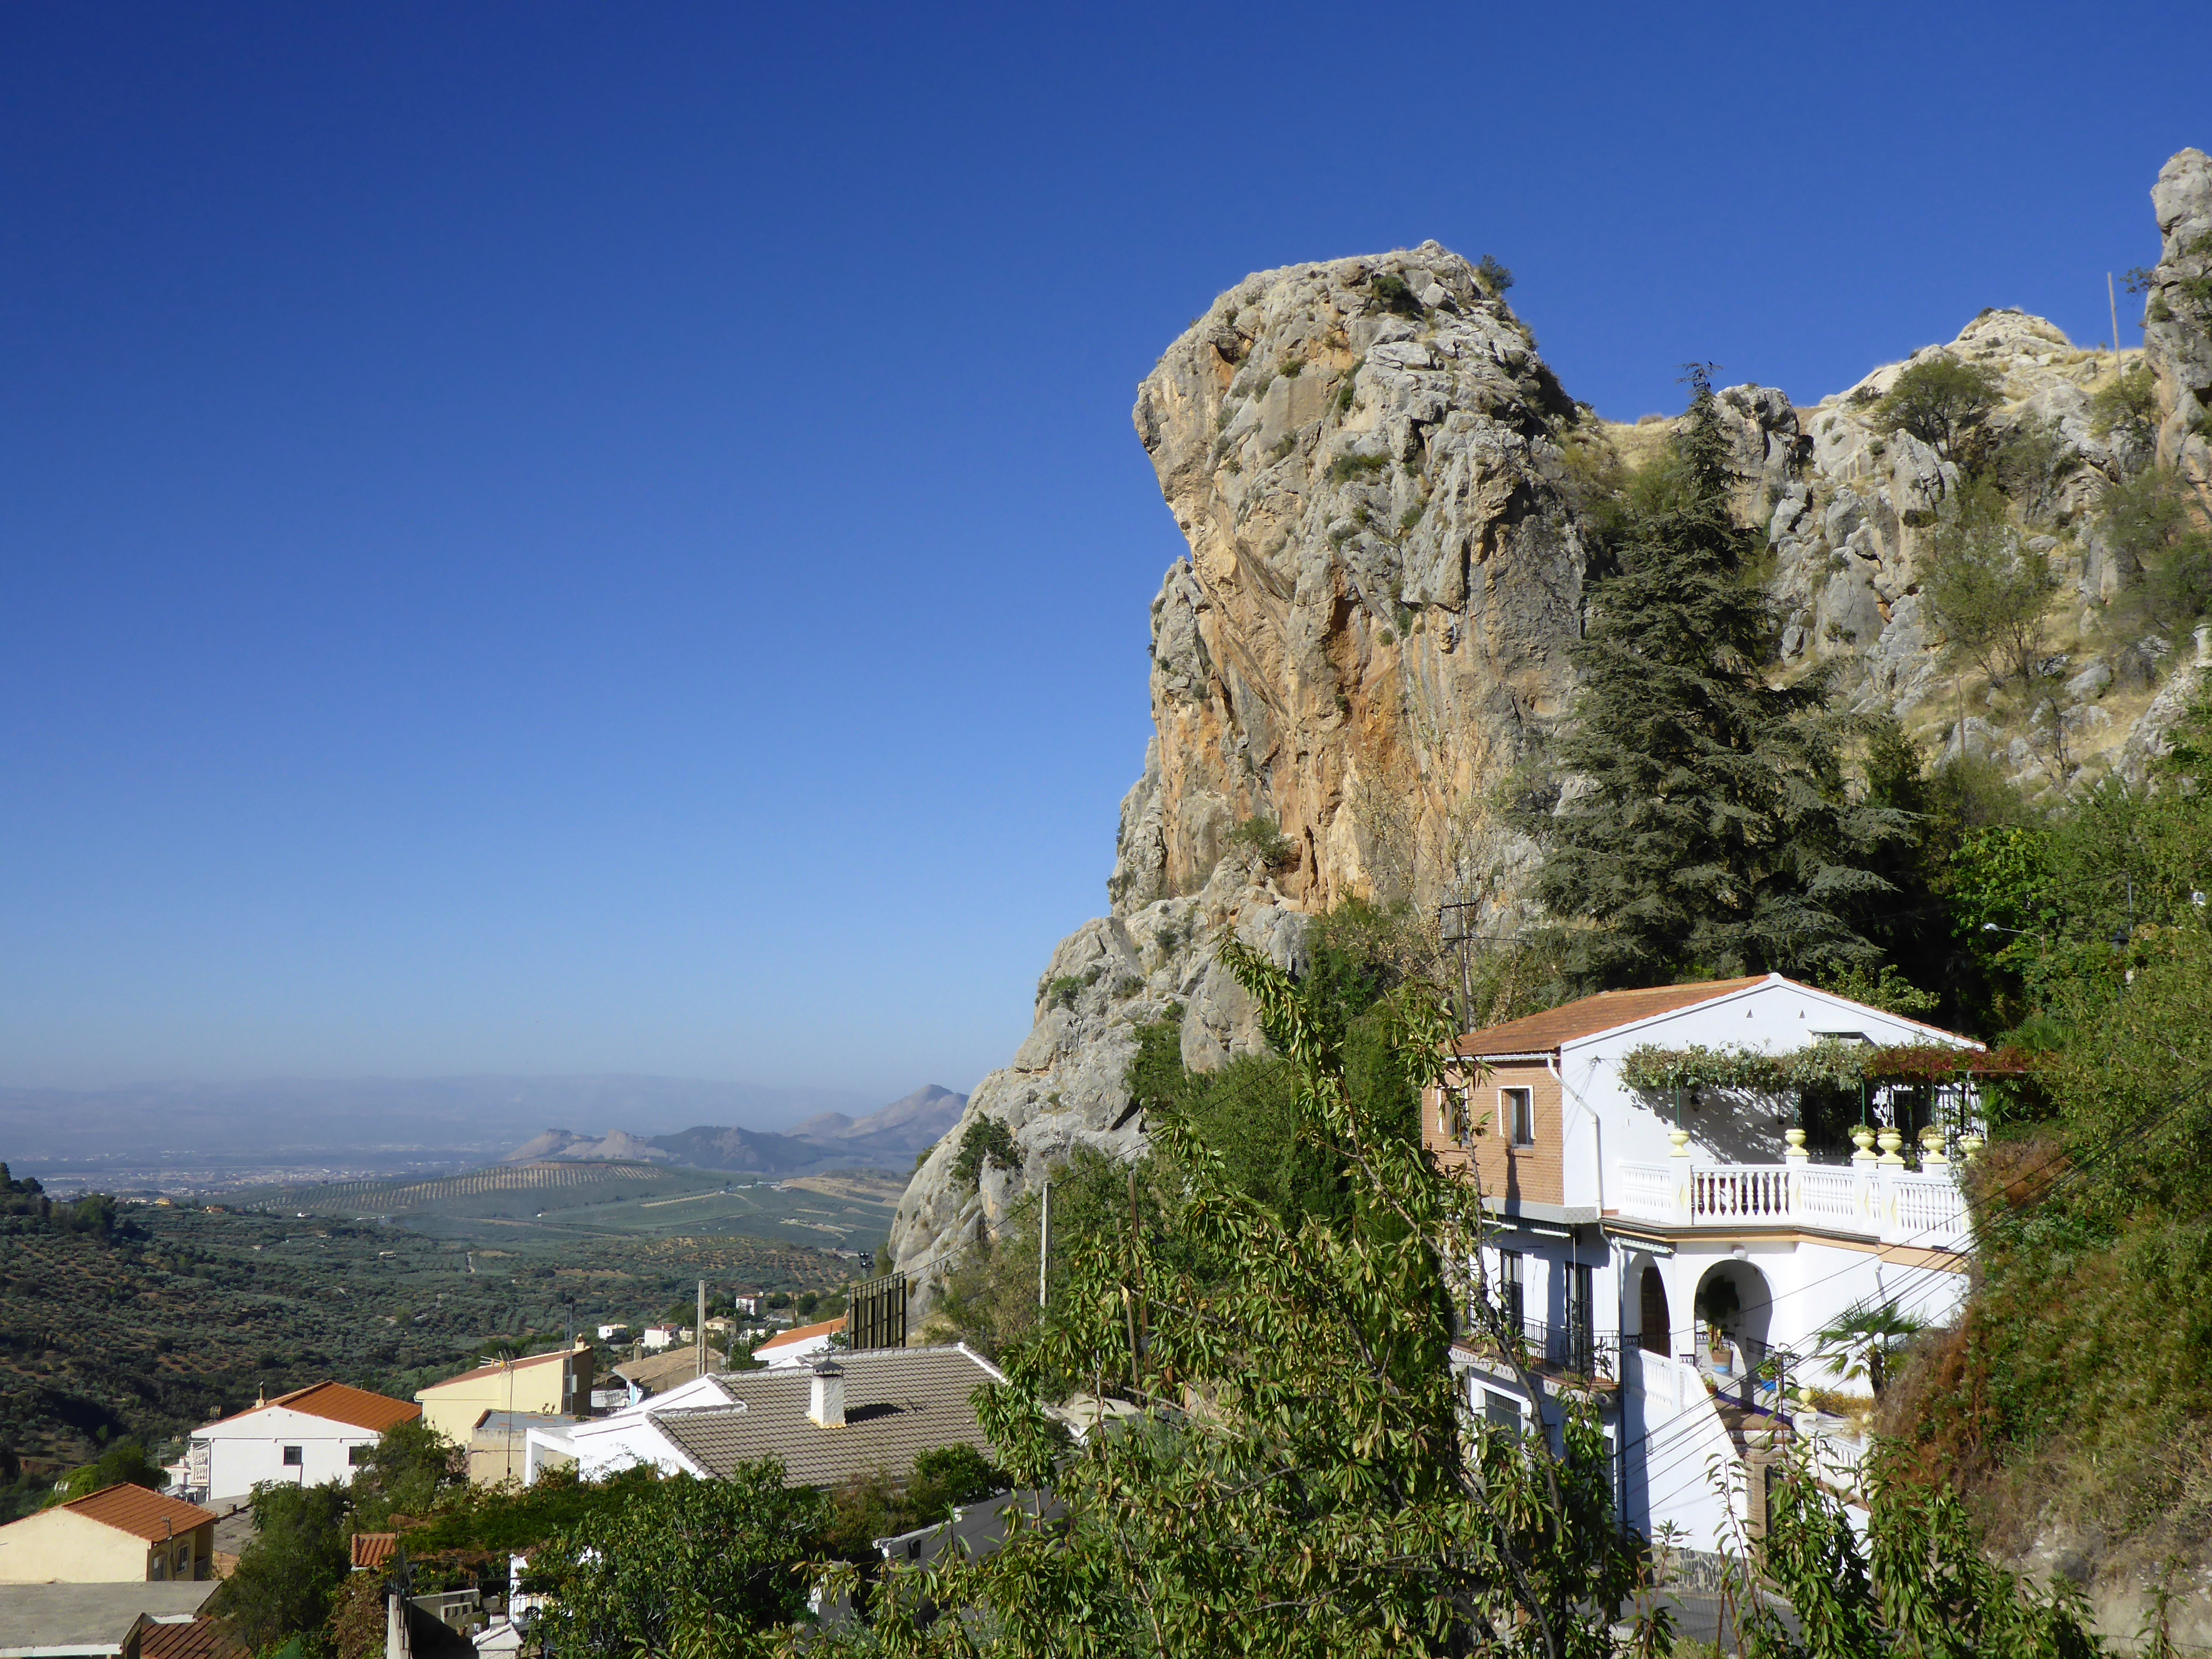 The Solana de granada guesthouse, with climbing crags in the background